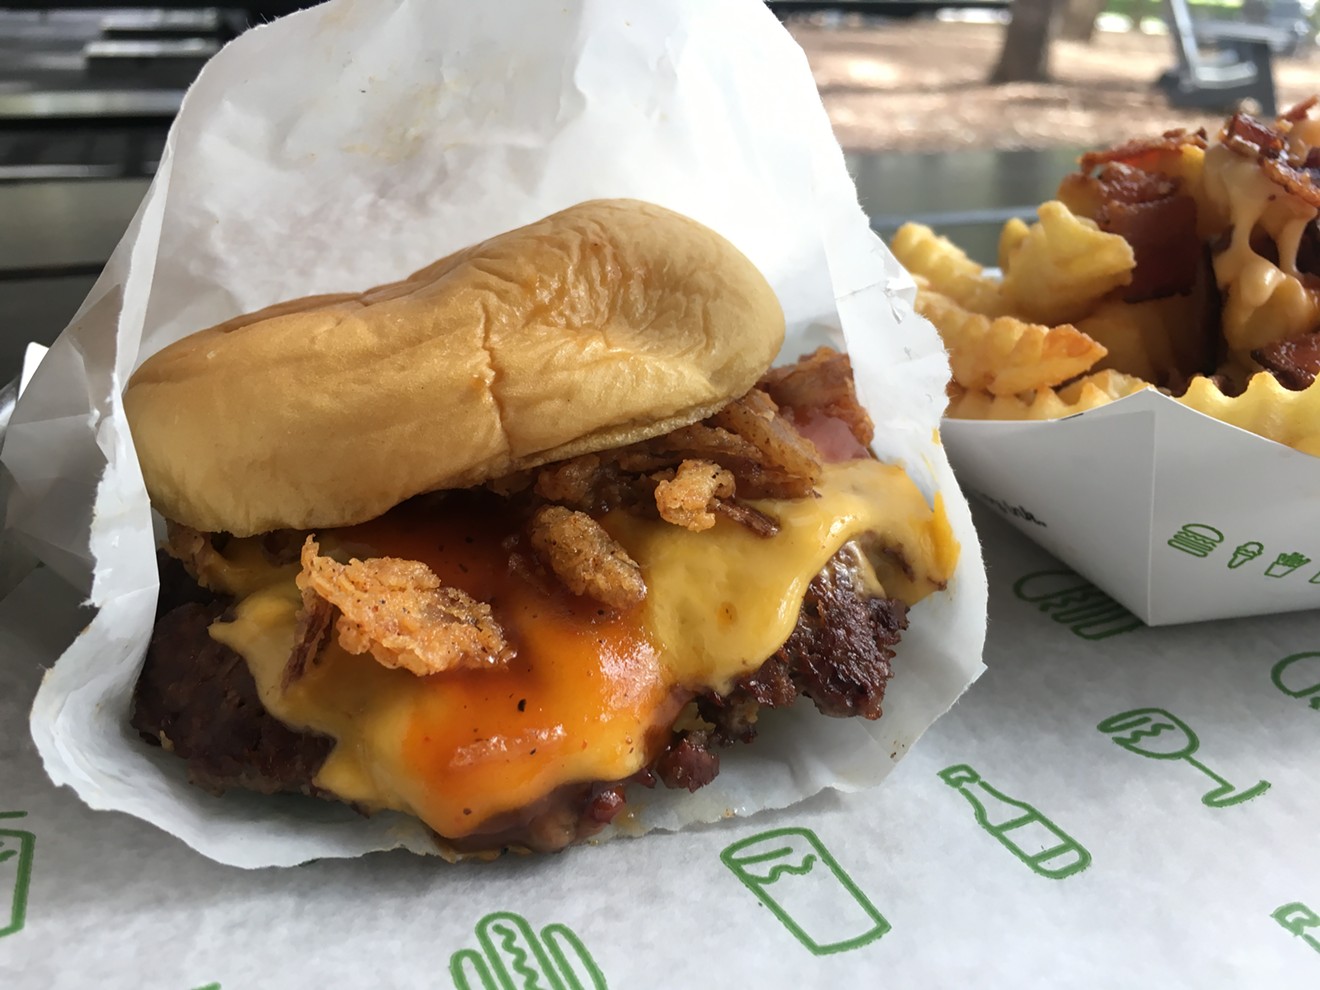 The BBQ ShackMeister Burger, with crispy, beer-marinated shallots, cheese and their new barbecue sauce. The signature soft potato roll too, of course.